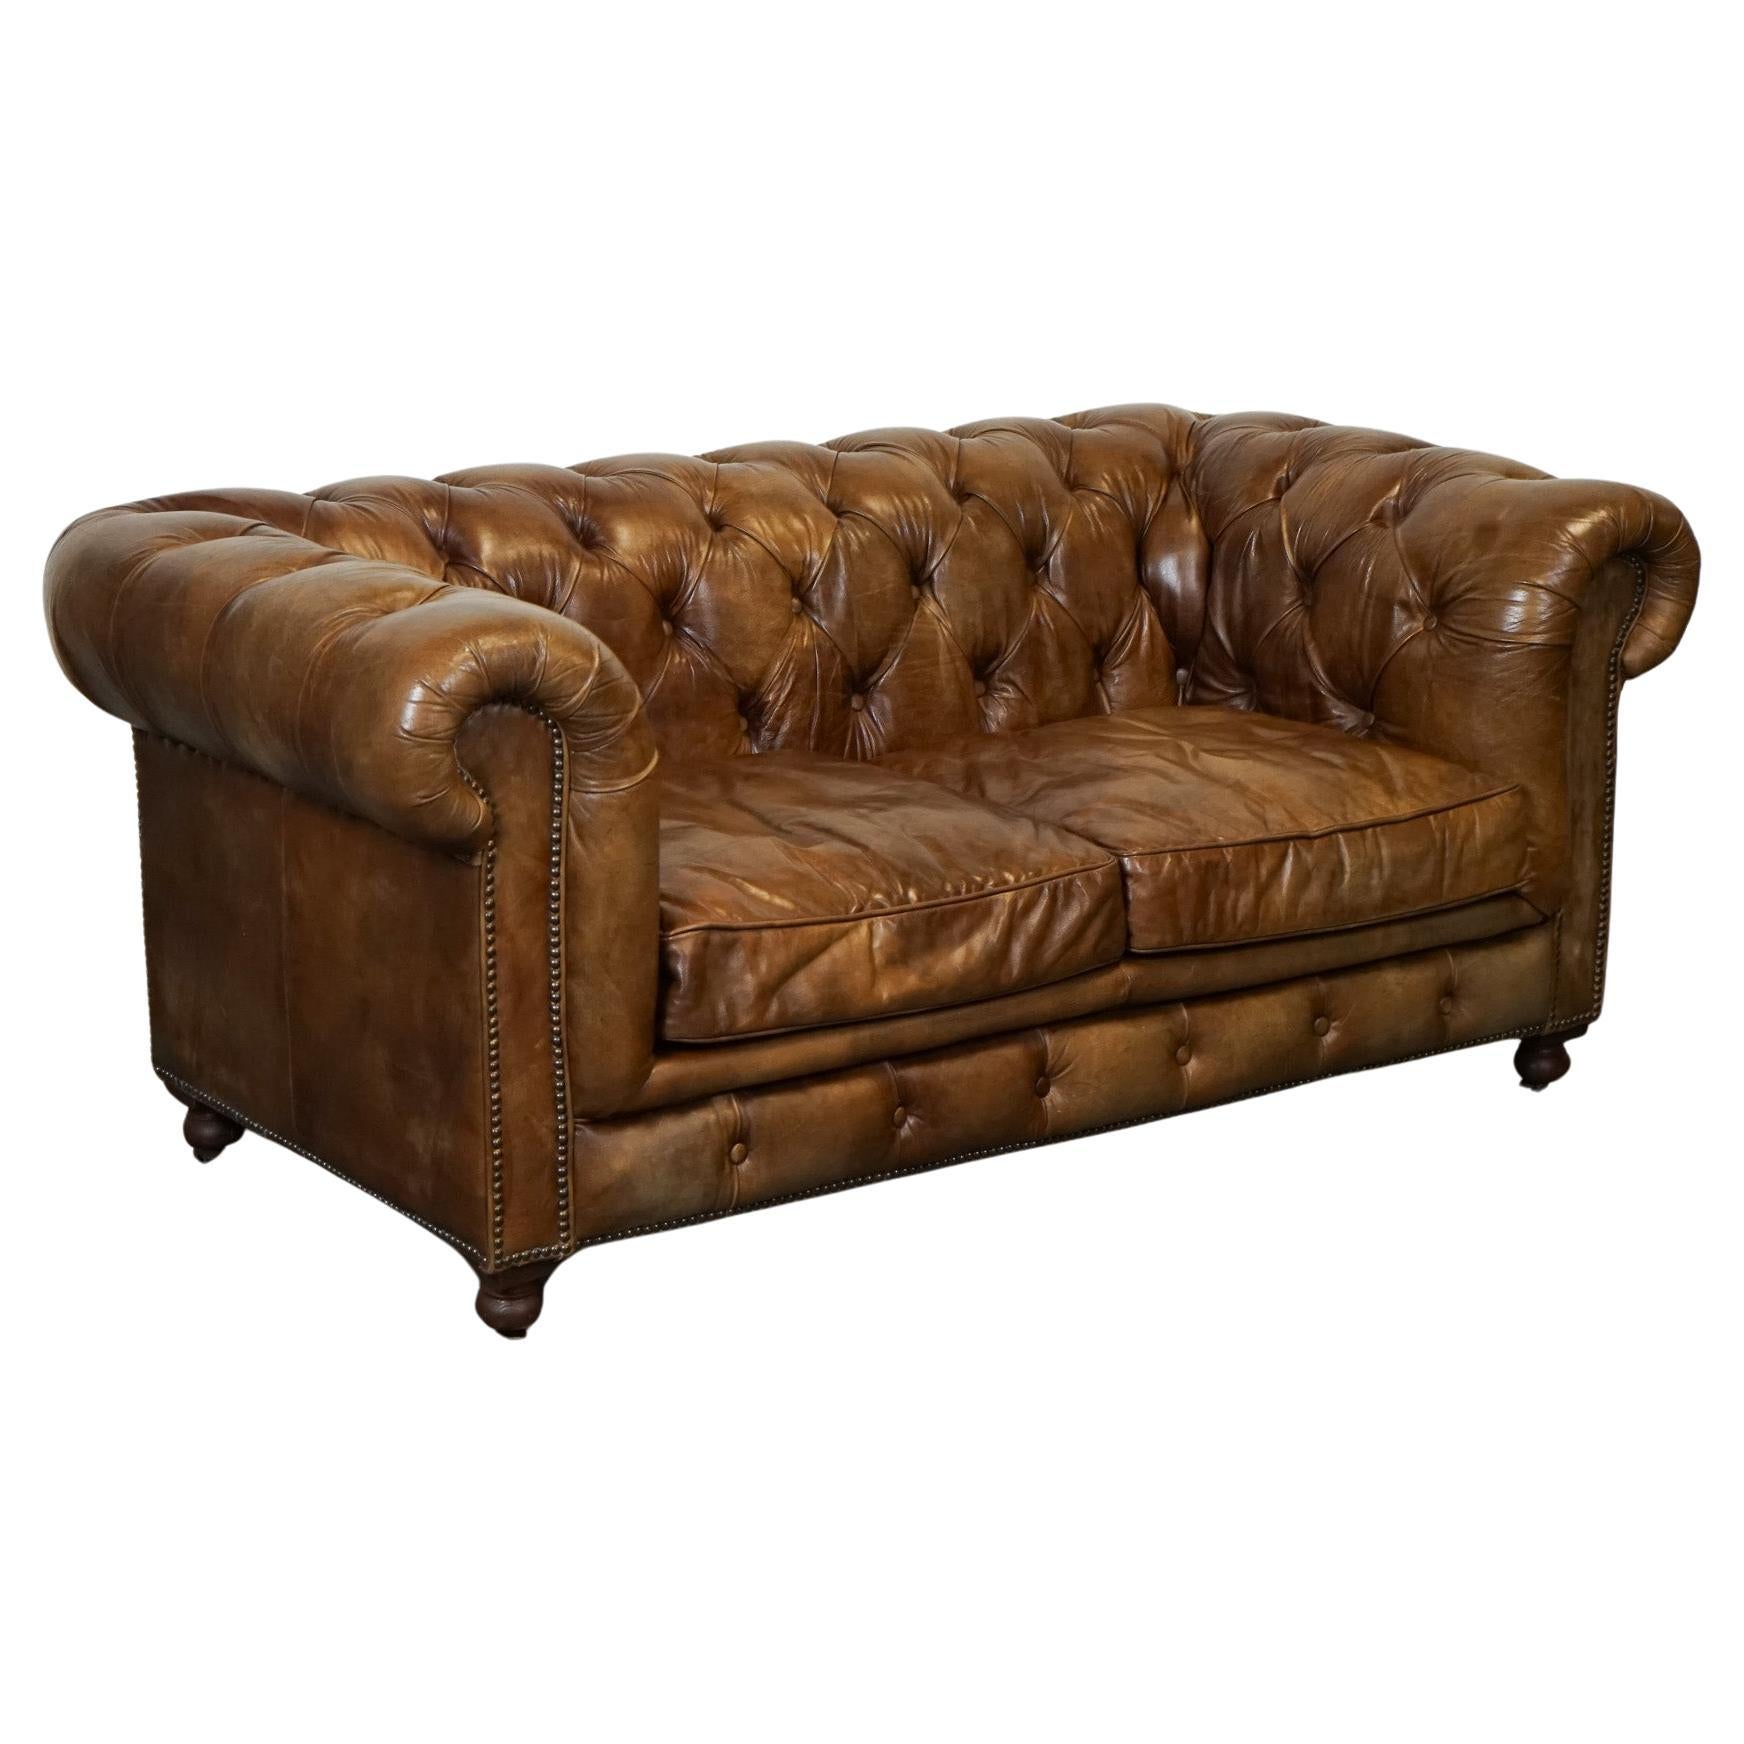 GORGEOUS TIMOTHY OULTON CHESTERFIELD SOFA BY HALO HERiTAGE BROWN LEATHER J1 For Sale